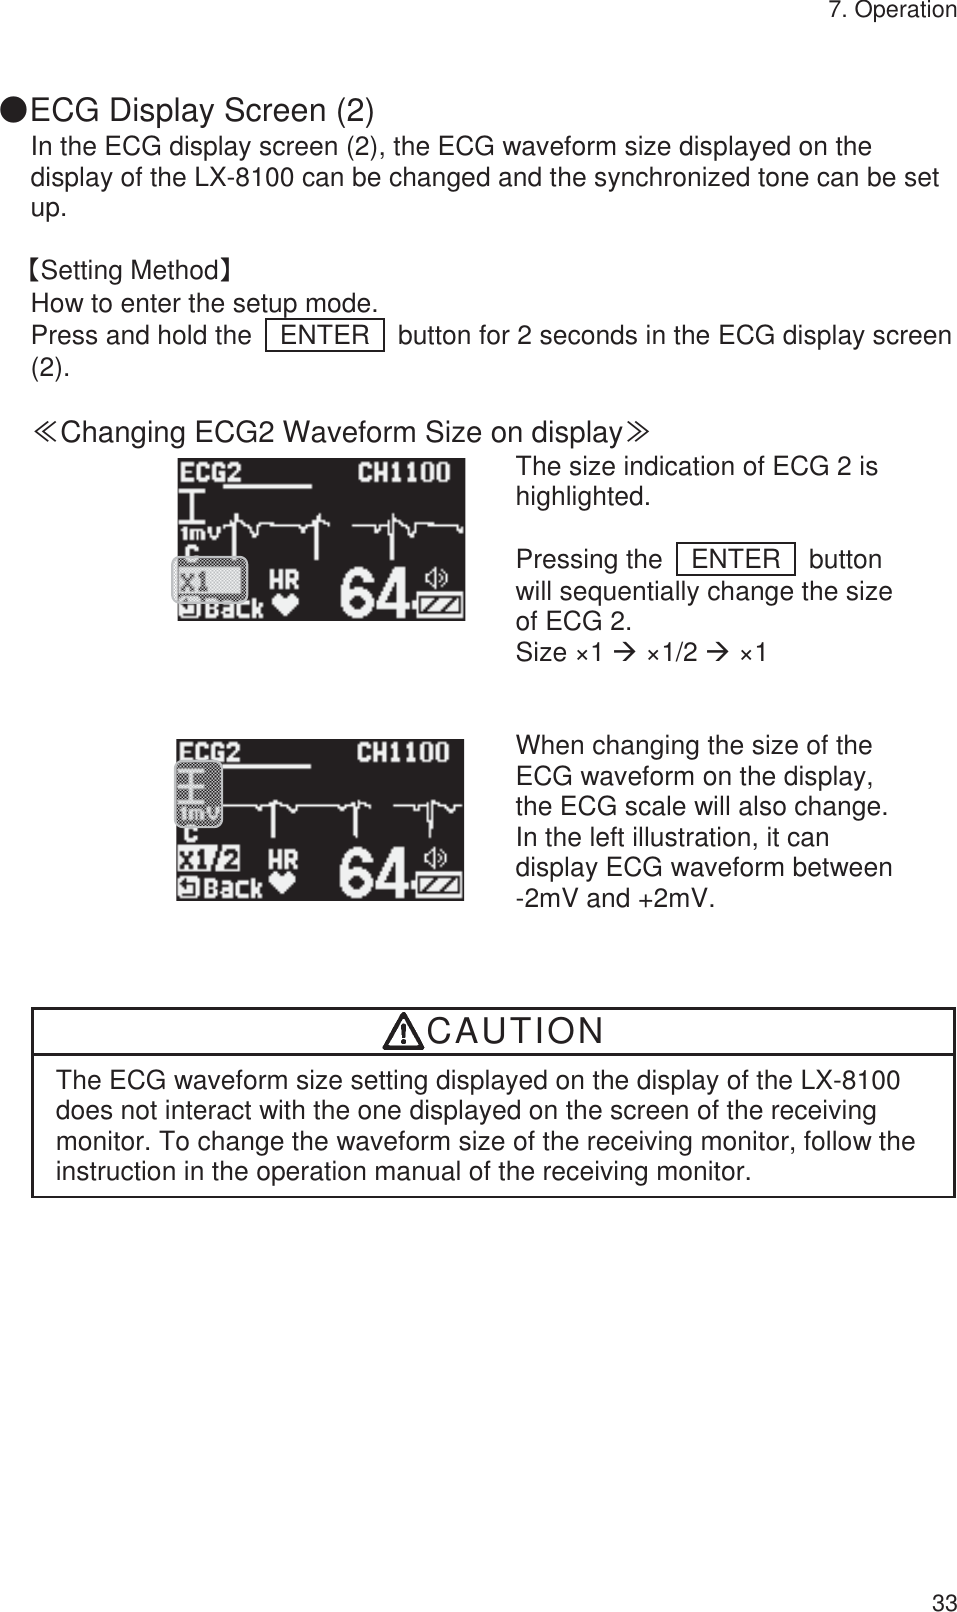 7. Operation 33  䖃ECG Display Screen (2)   In the ECG display screen (2), the ECG waveform size displayed on the display of the LX-8100 can be changed and the synchronized tone can be set up.  ࠙Setting Methodࠚ How to enter the setup mode. Press and hold the    ENTER    button for 2 seconds in the ECG display screen (2).  䍾Changing ECG2 Waveform Size on display䍿        The size indication of ECG 2 is highlighted.  Pressing the  ENTER  button will sequentially change the size of ECG 2. Size ×1 Æ ×1/2 Æ ×1          When changing the size of the ECG waveform on the display, the ECG scale will also change. In the left illustration, it can display ECG waveform between   -2mV and +2mV. CAUTION The ECG waveform size setting displayed on the display of the LX-8100 does not interact with the one displayed on the screen of the receiving monitor. To change the waveform size of the receiving monitor, follow the instruction in the operation manual of the receiving monitor. 